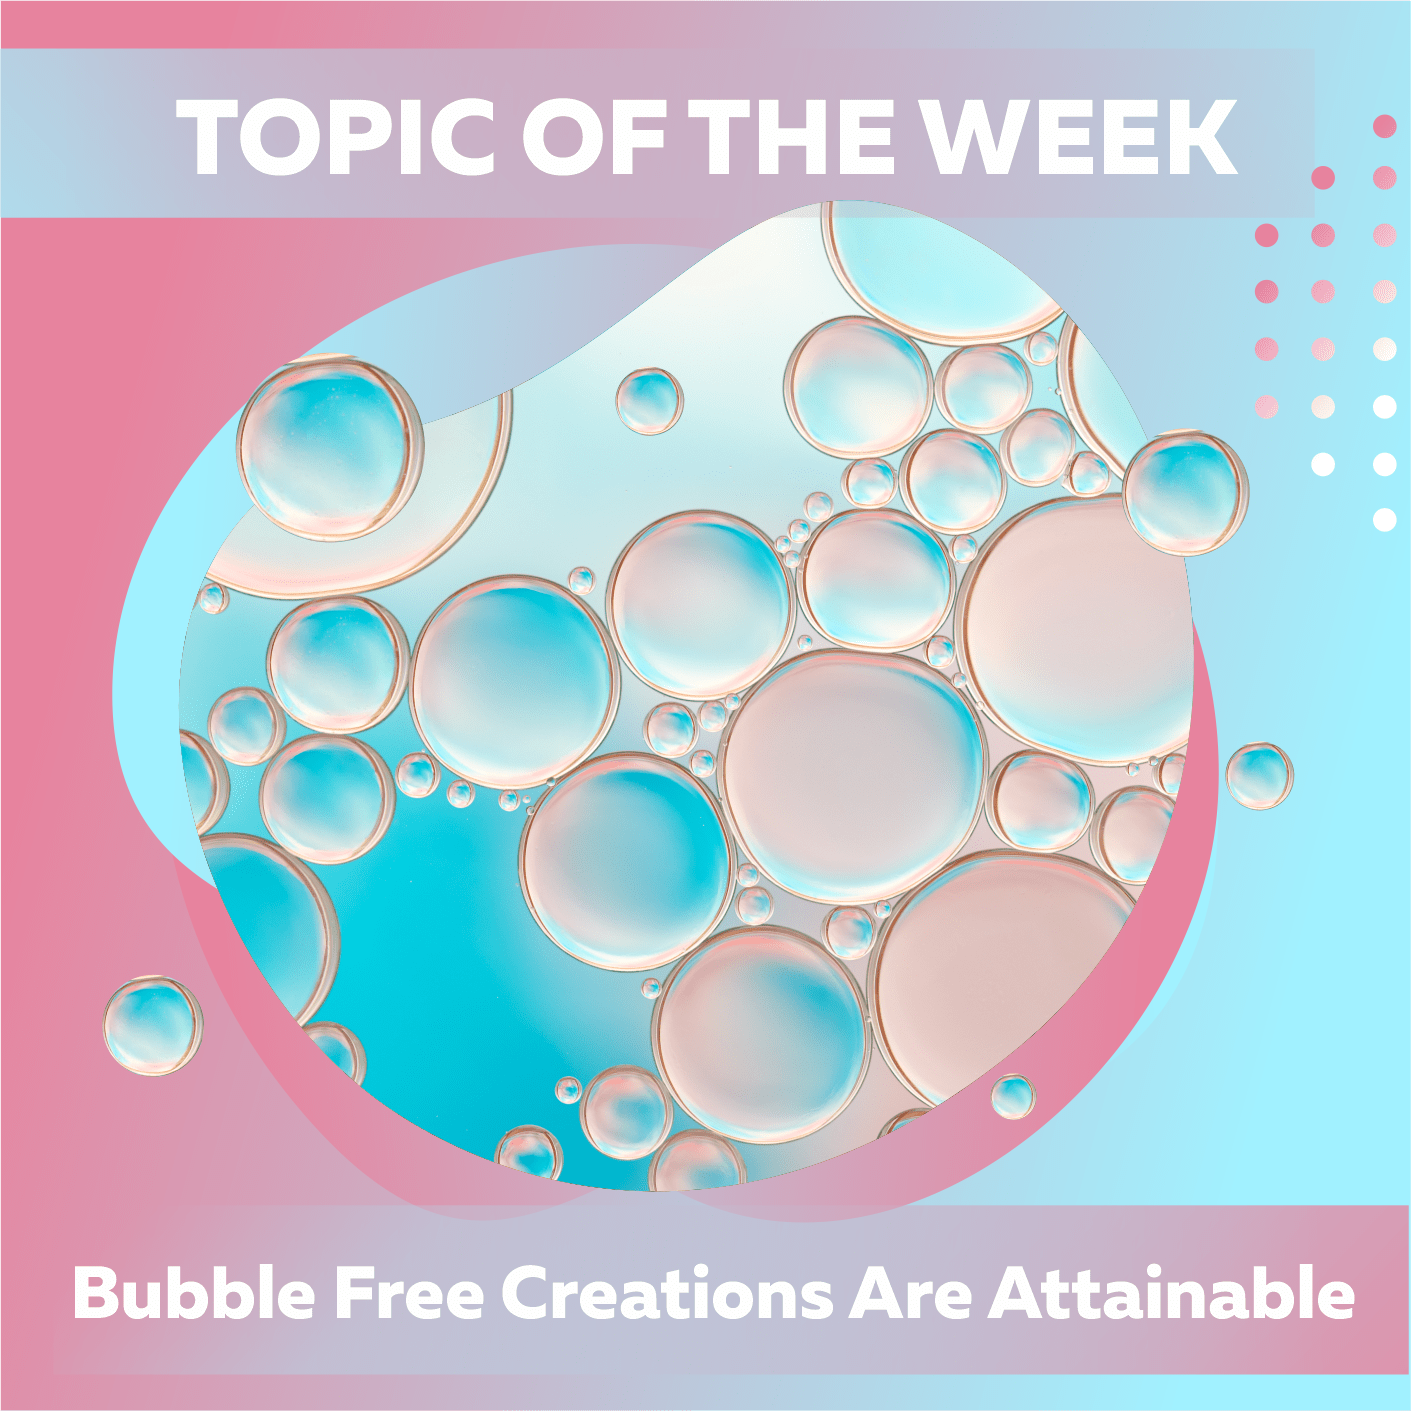 Bubble Free Creations Are Attainable - Read On To Learn How To Create Crystal Clear Epoxy Resin Projects: